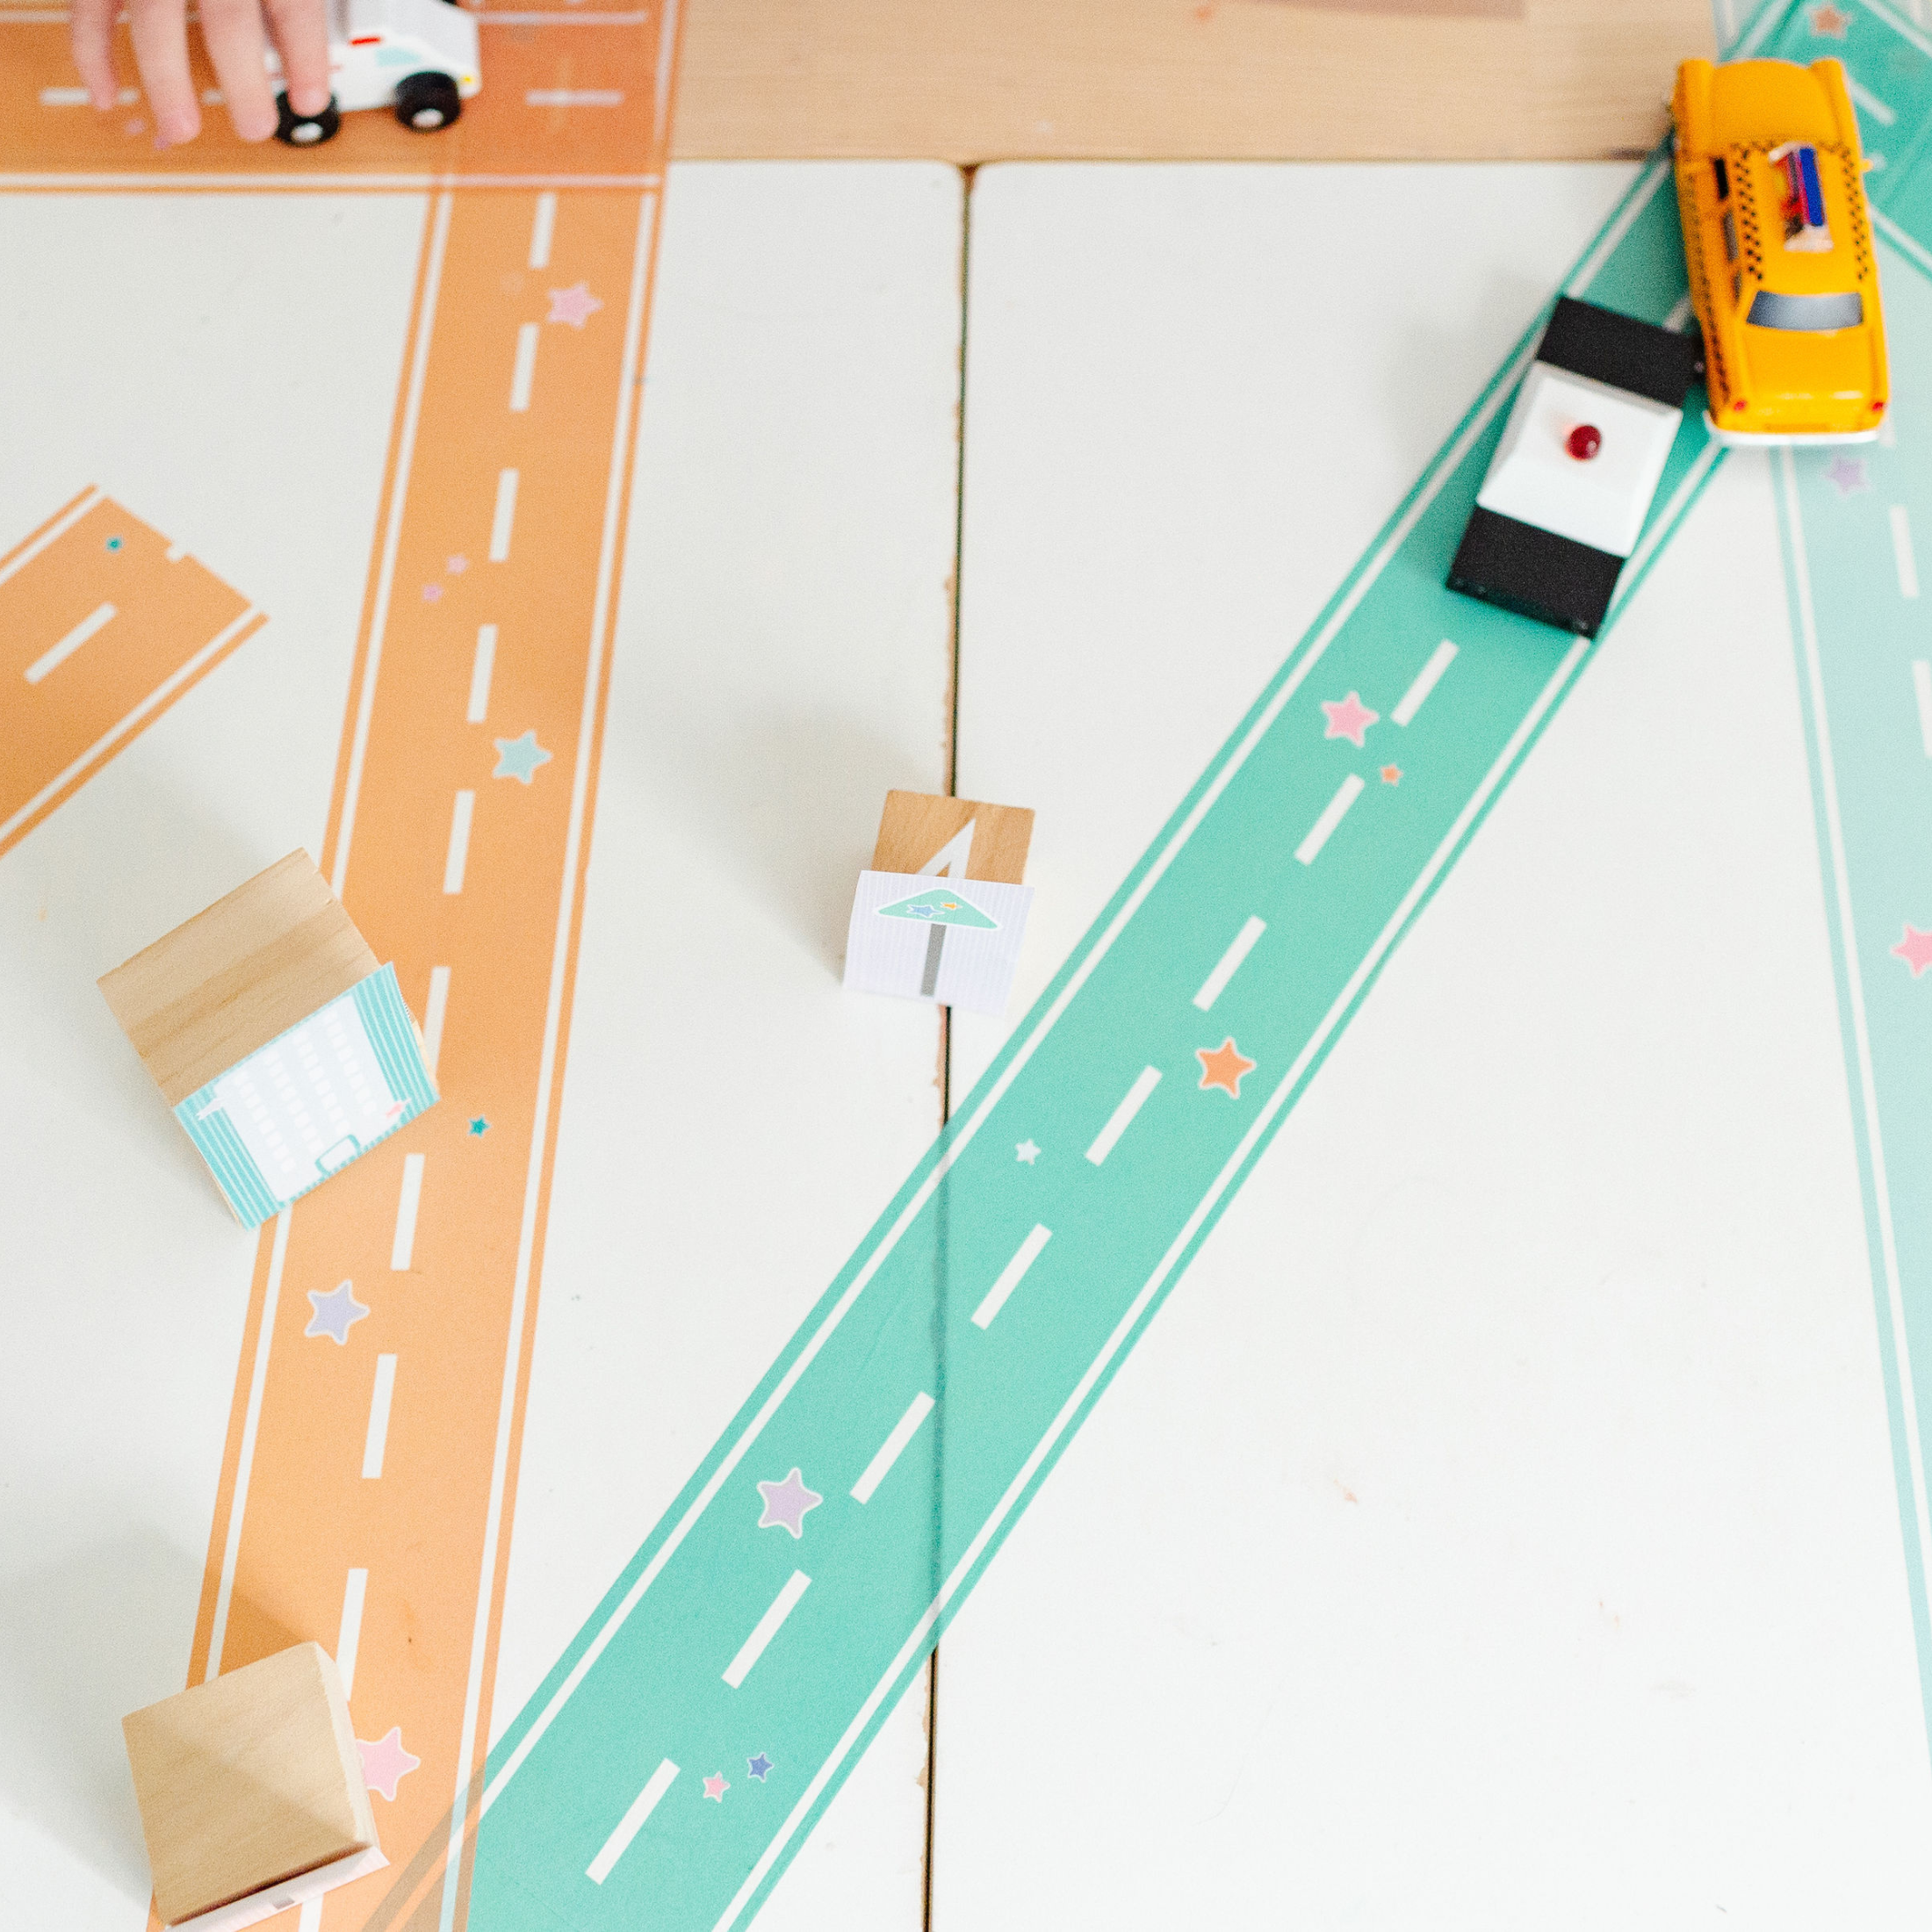 Road Tape Activity Set, The Barefoot Kids